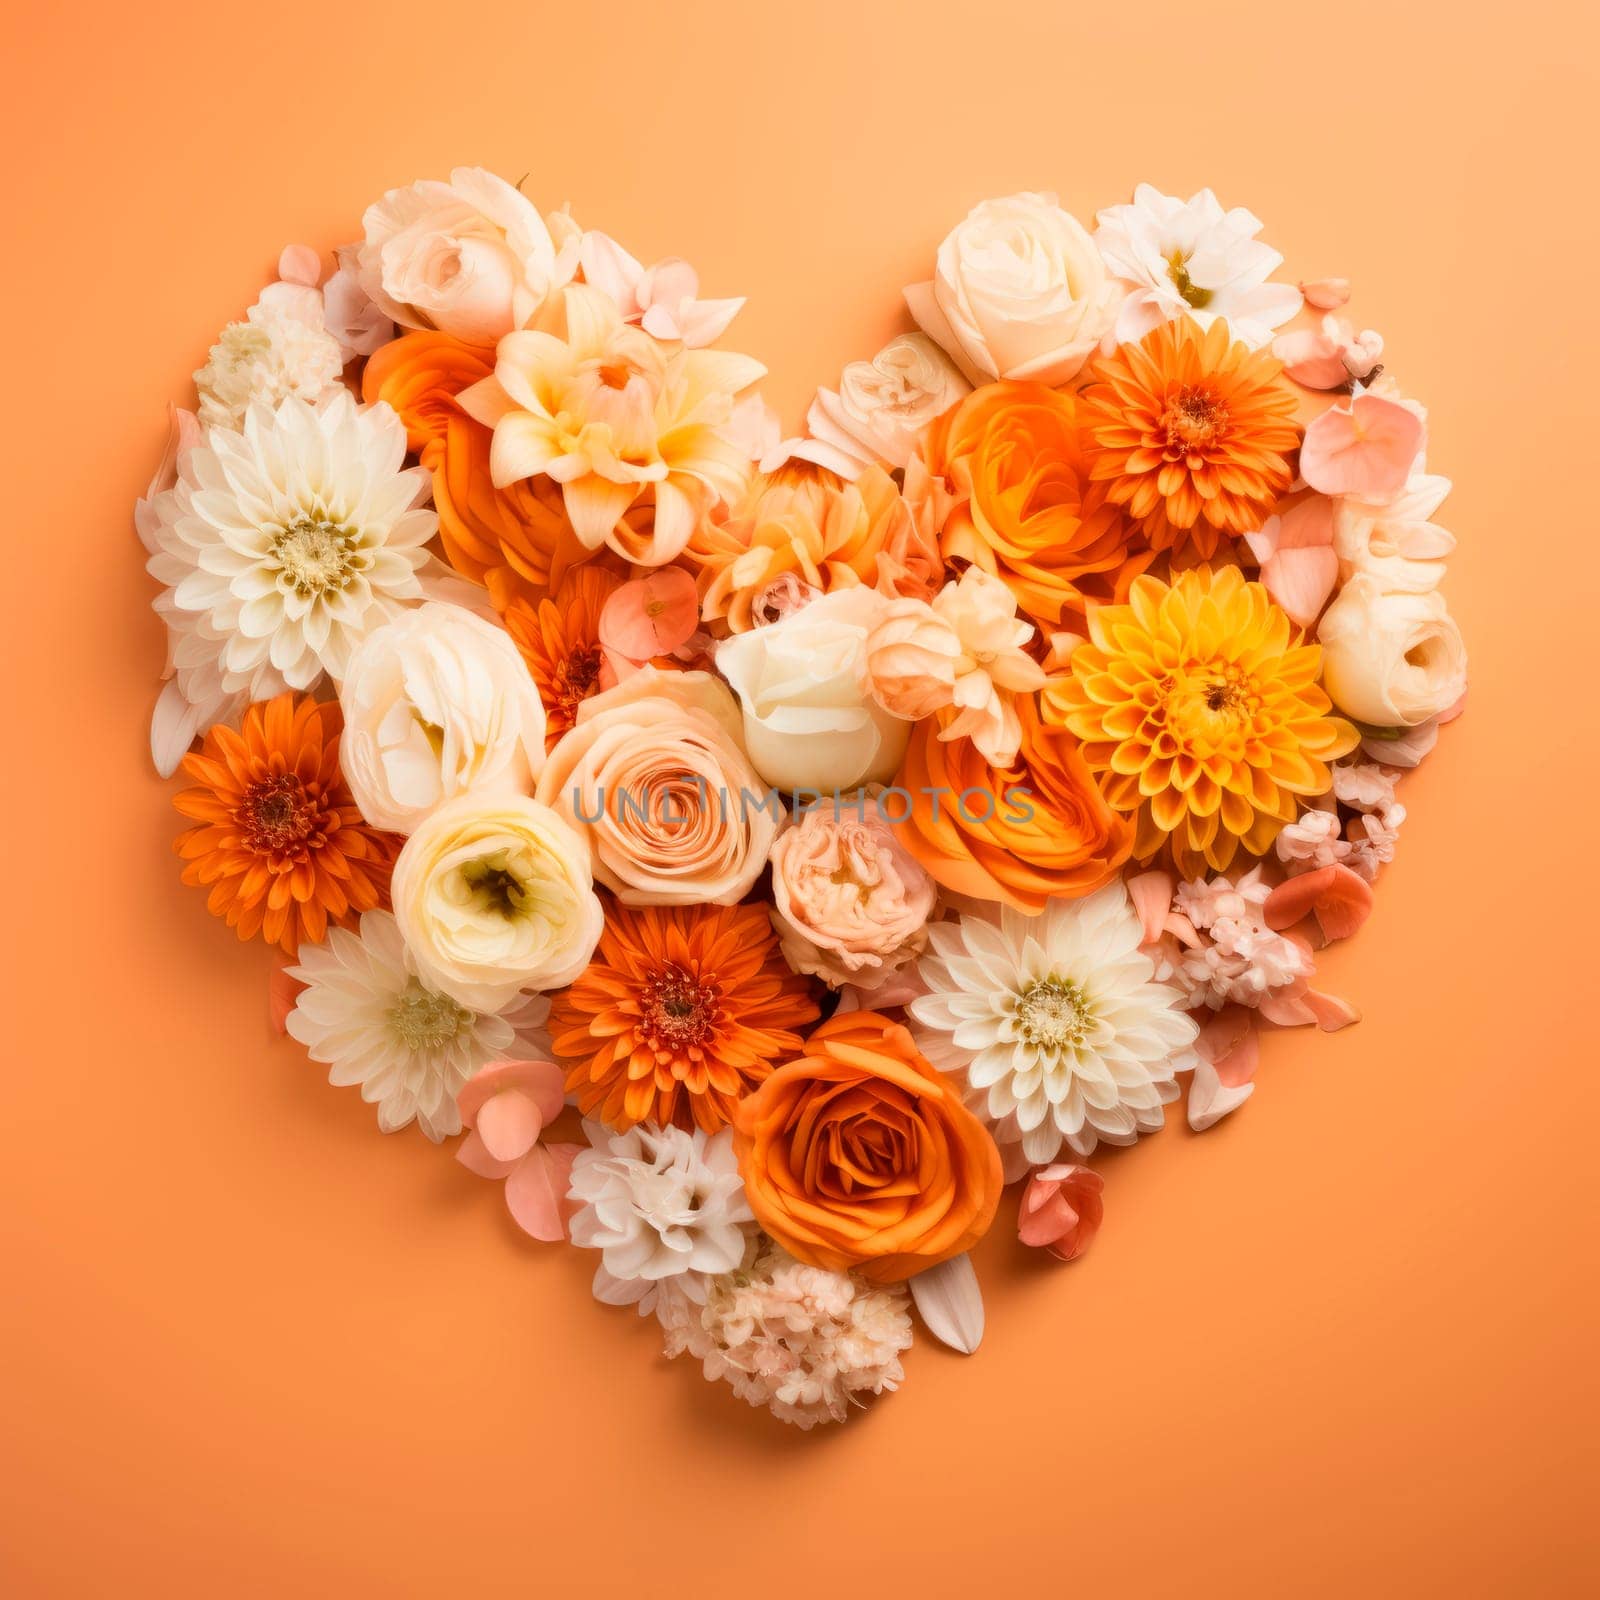 The heart is lined with beautiful multicolored flowers in a yellow-orange scale by Spirina